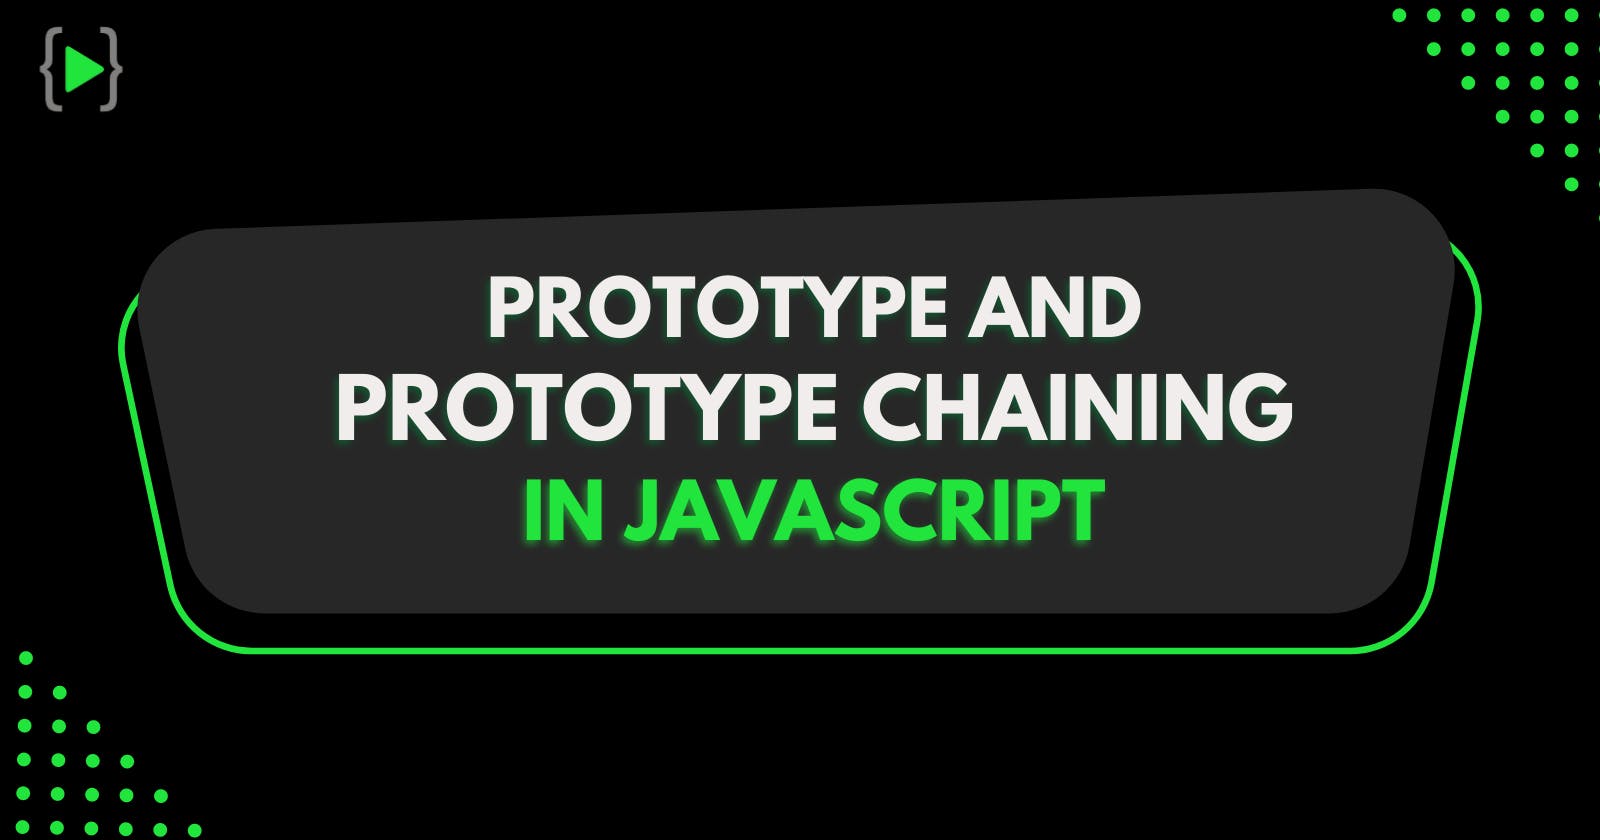 What is prototype and prototype chaining in JavaScript?